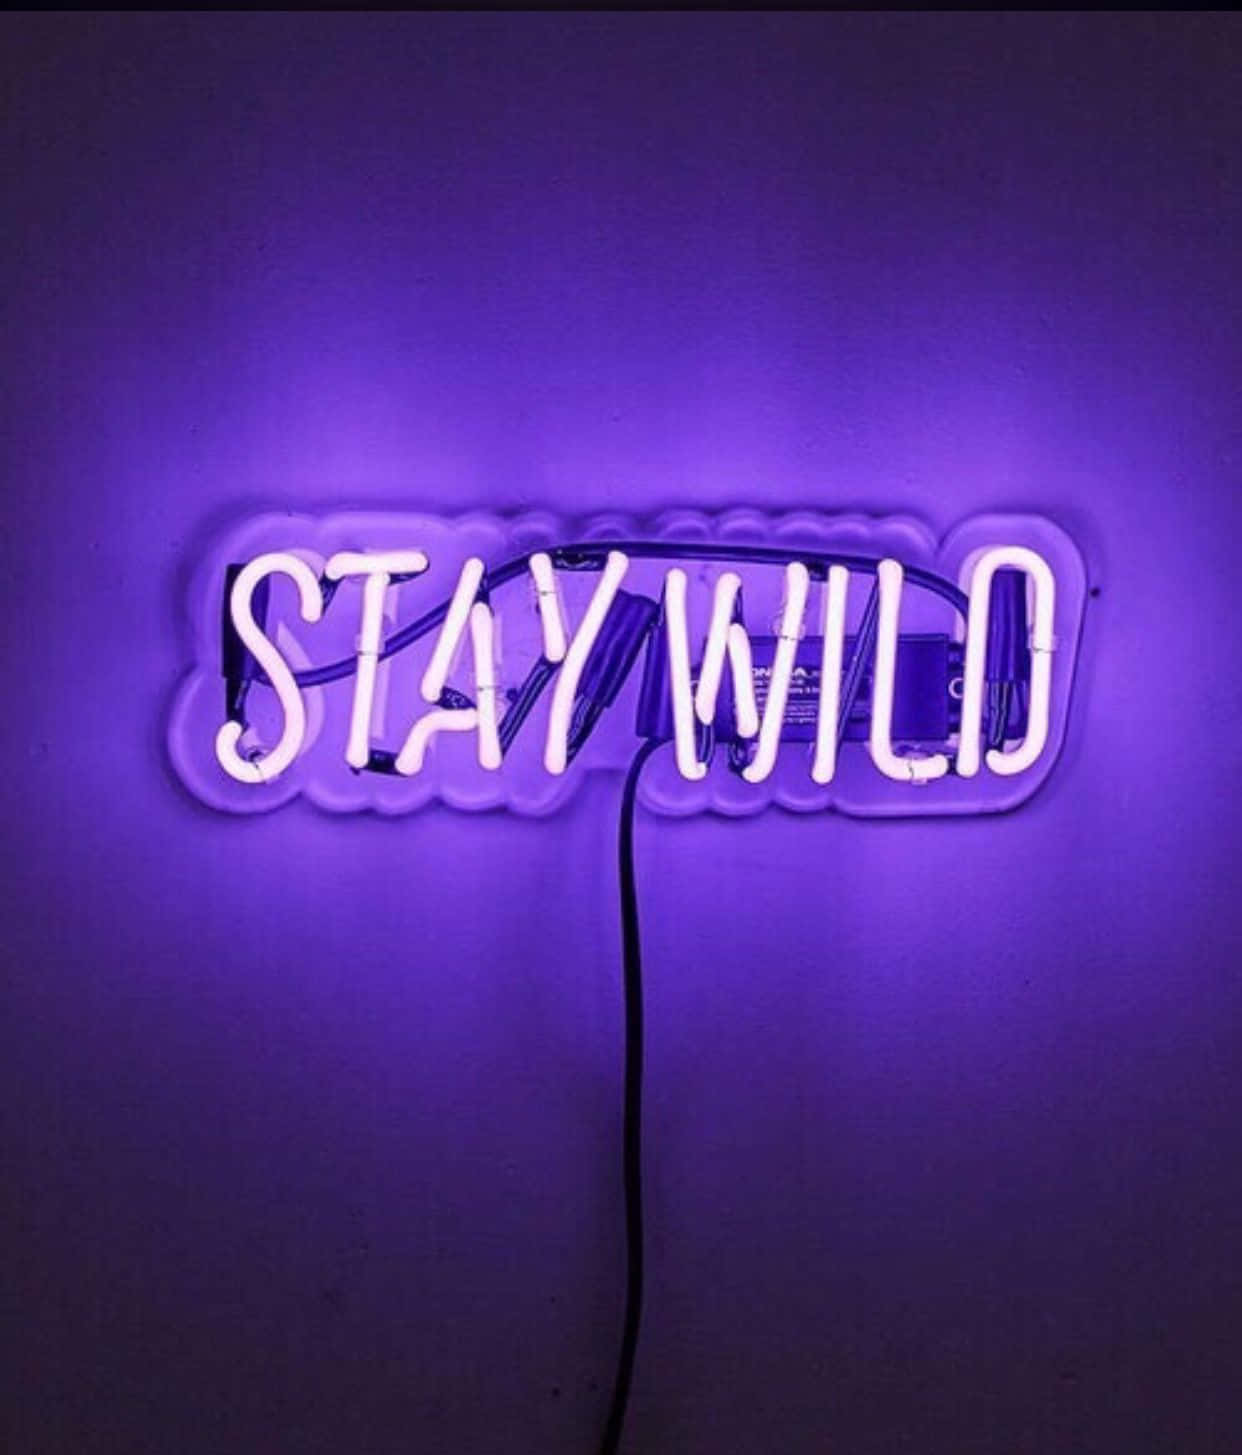 Brighten up your day with Neon Lights Aesthetic Wallpaper